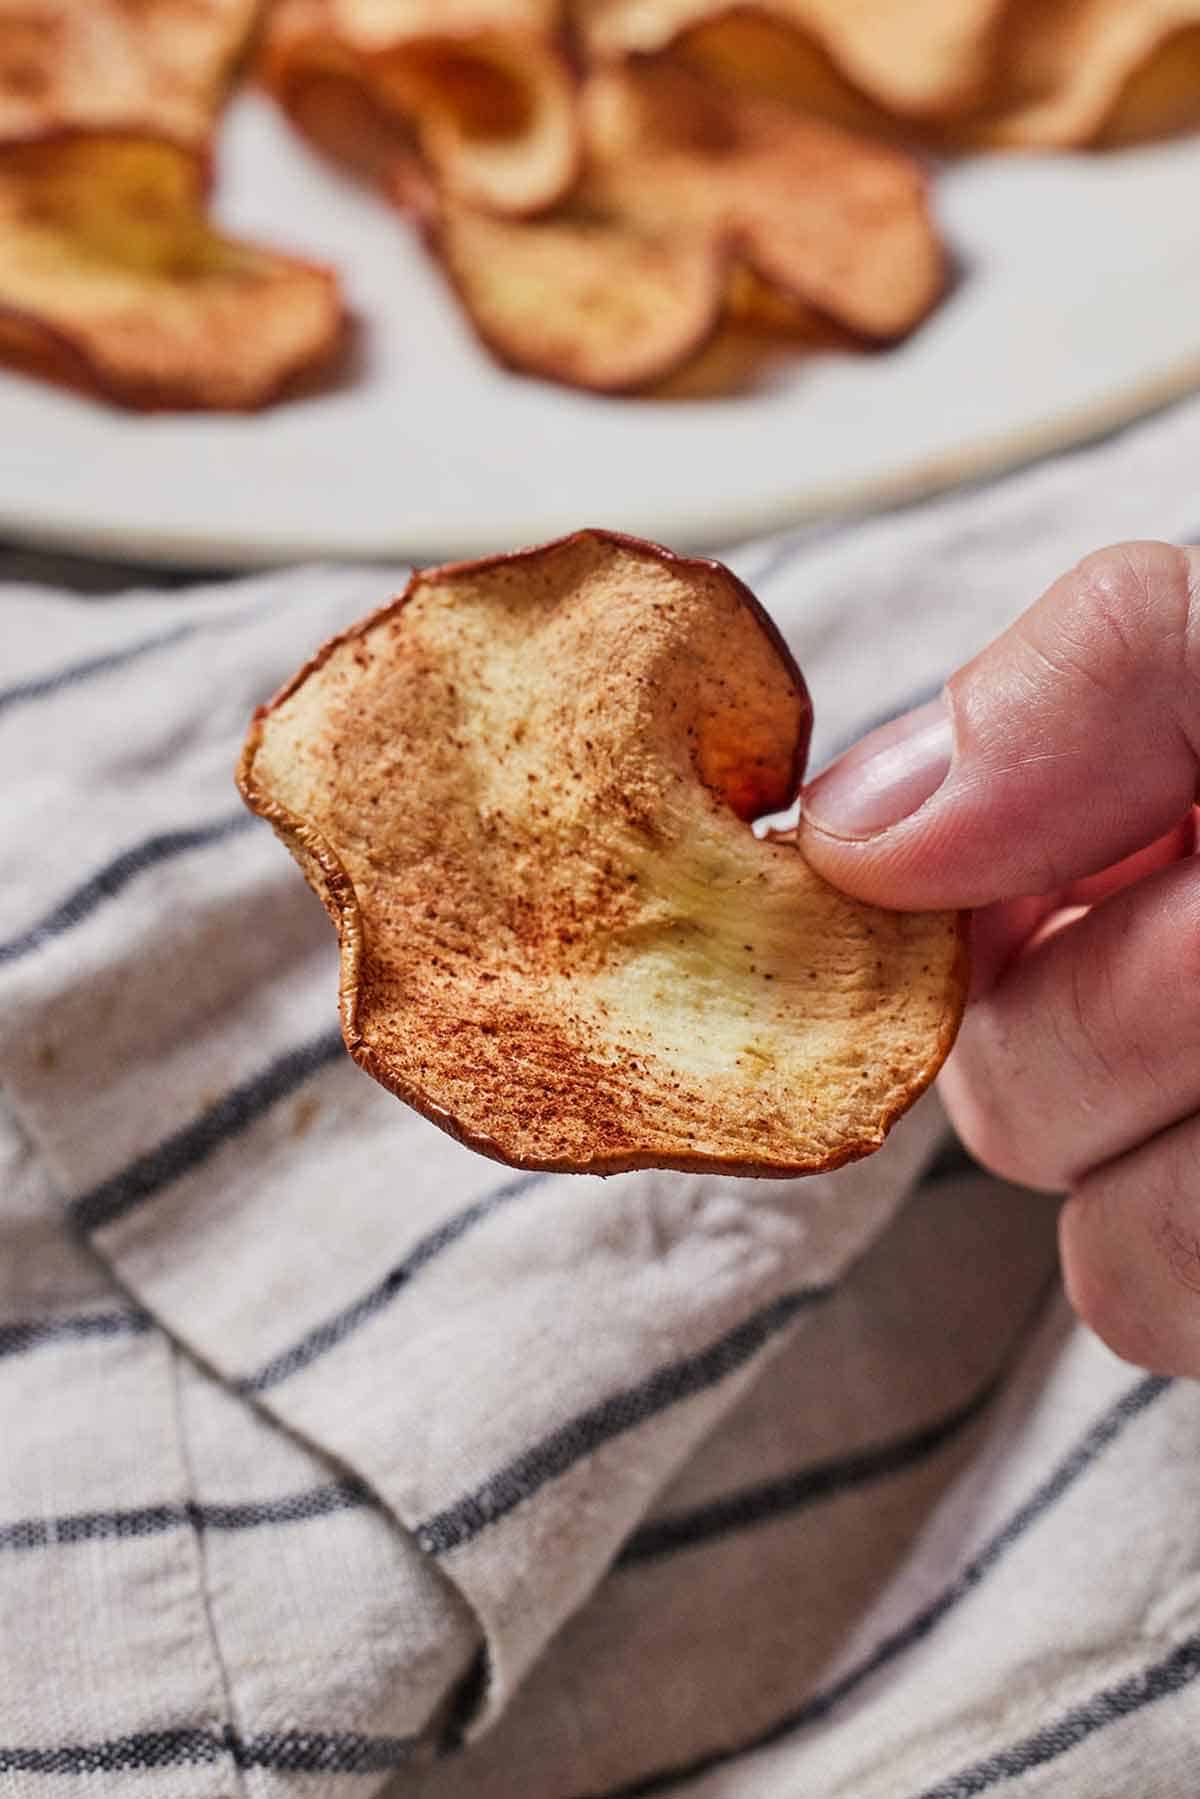 A hand holding up an air fryer apple chip in front of a plate of more chips.